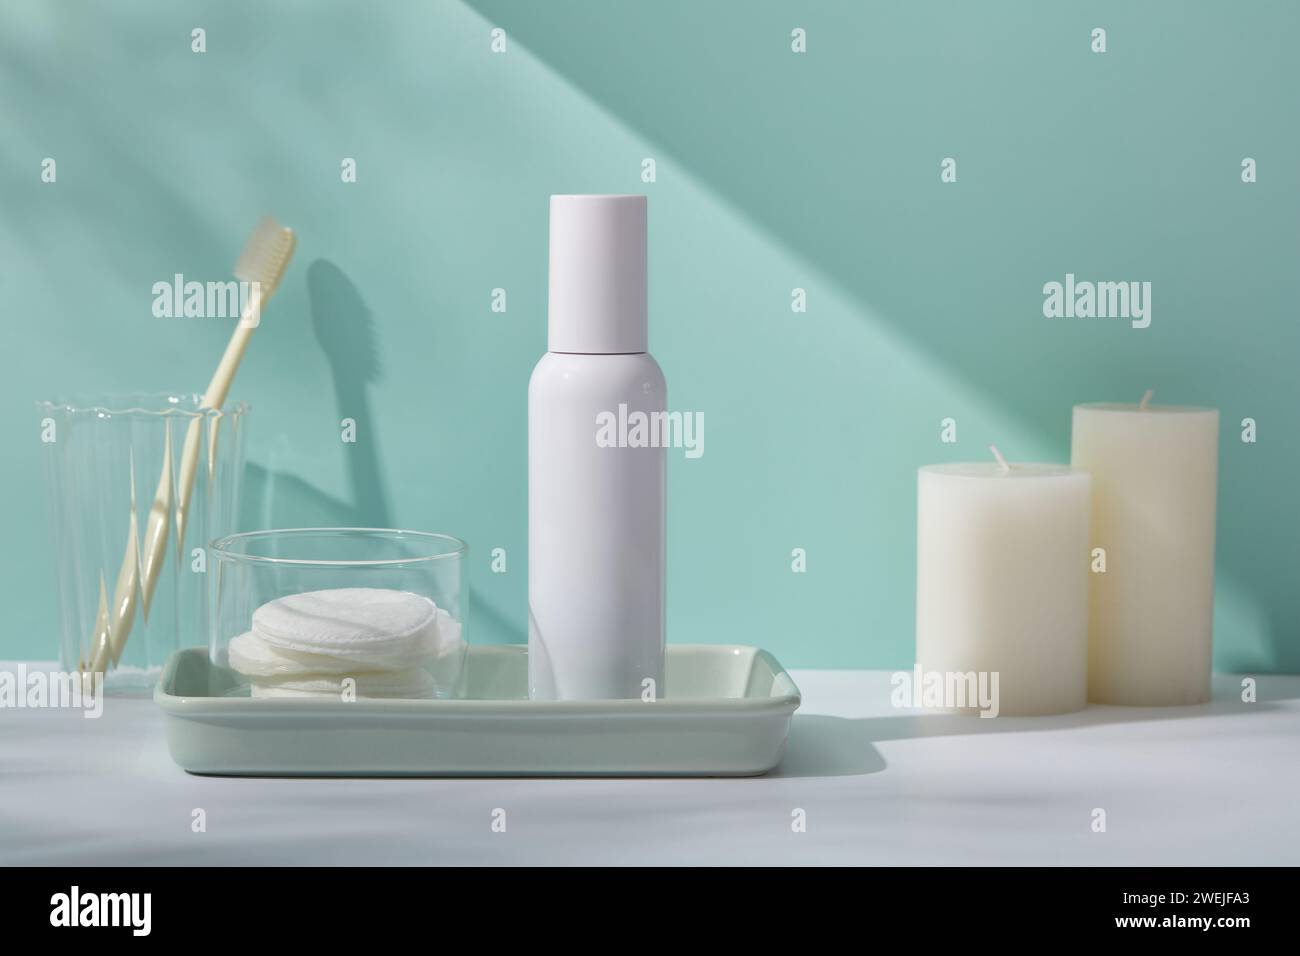 Mockup scene for cosmetic product with plastic bottle without label and remove makeup cotton on rectangle tray, toothbrushes in glass cup and scented Stock Photo